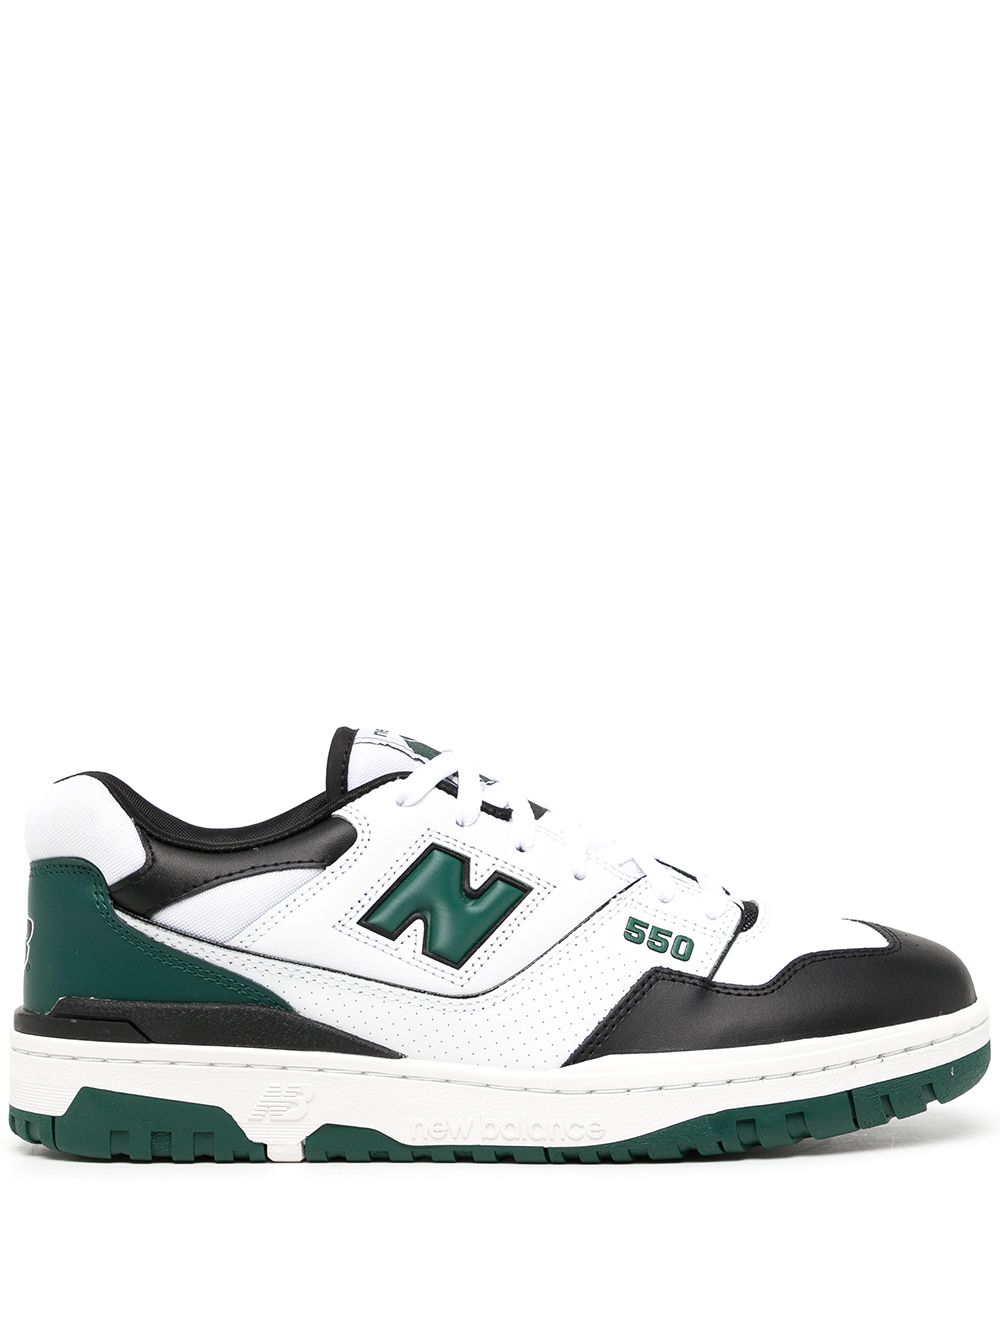 New Balance 550 low-top sneakers - White von New Balance